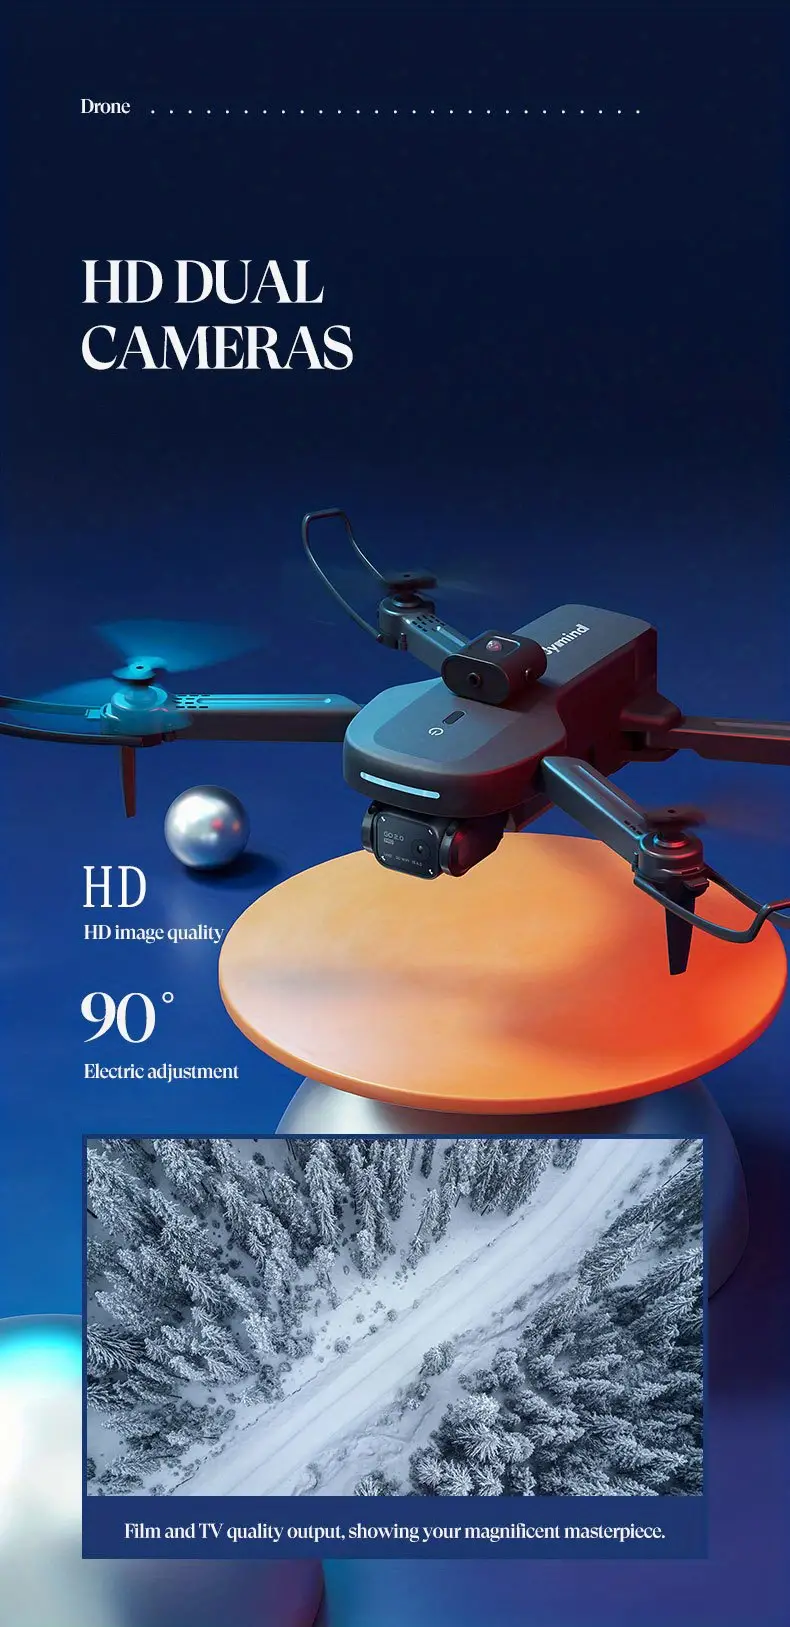 drone with eic camera laser obstacle avoidance headless mode optical flow positioning one key return smart follow 5g real time image transmission gesture photography details 2